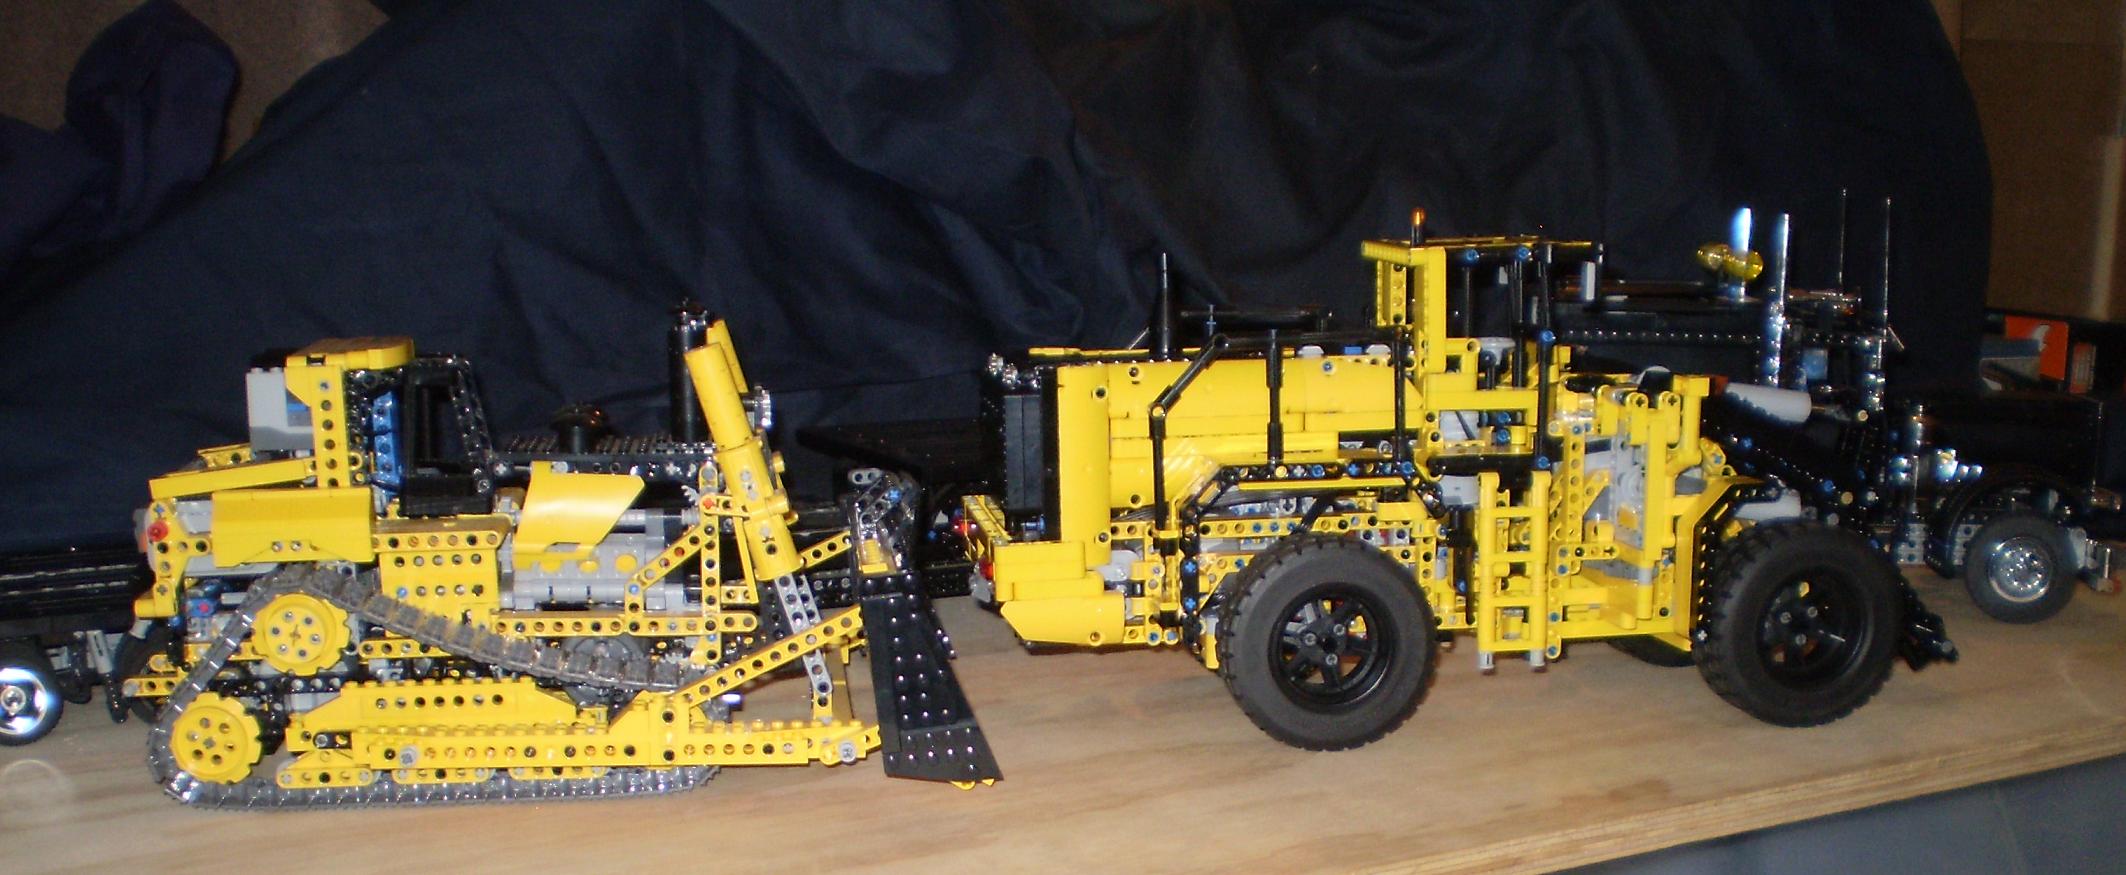 REVIEW] 42030 - Volvo L350F Wheel Loader - Page 12 - LEGO Technic, Model Team and Scale Modeling - Forums